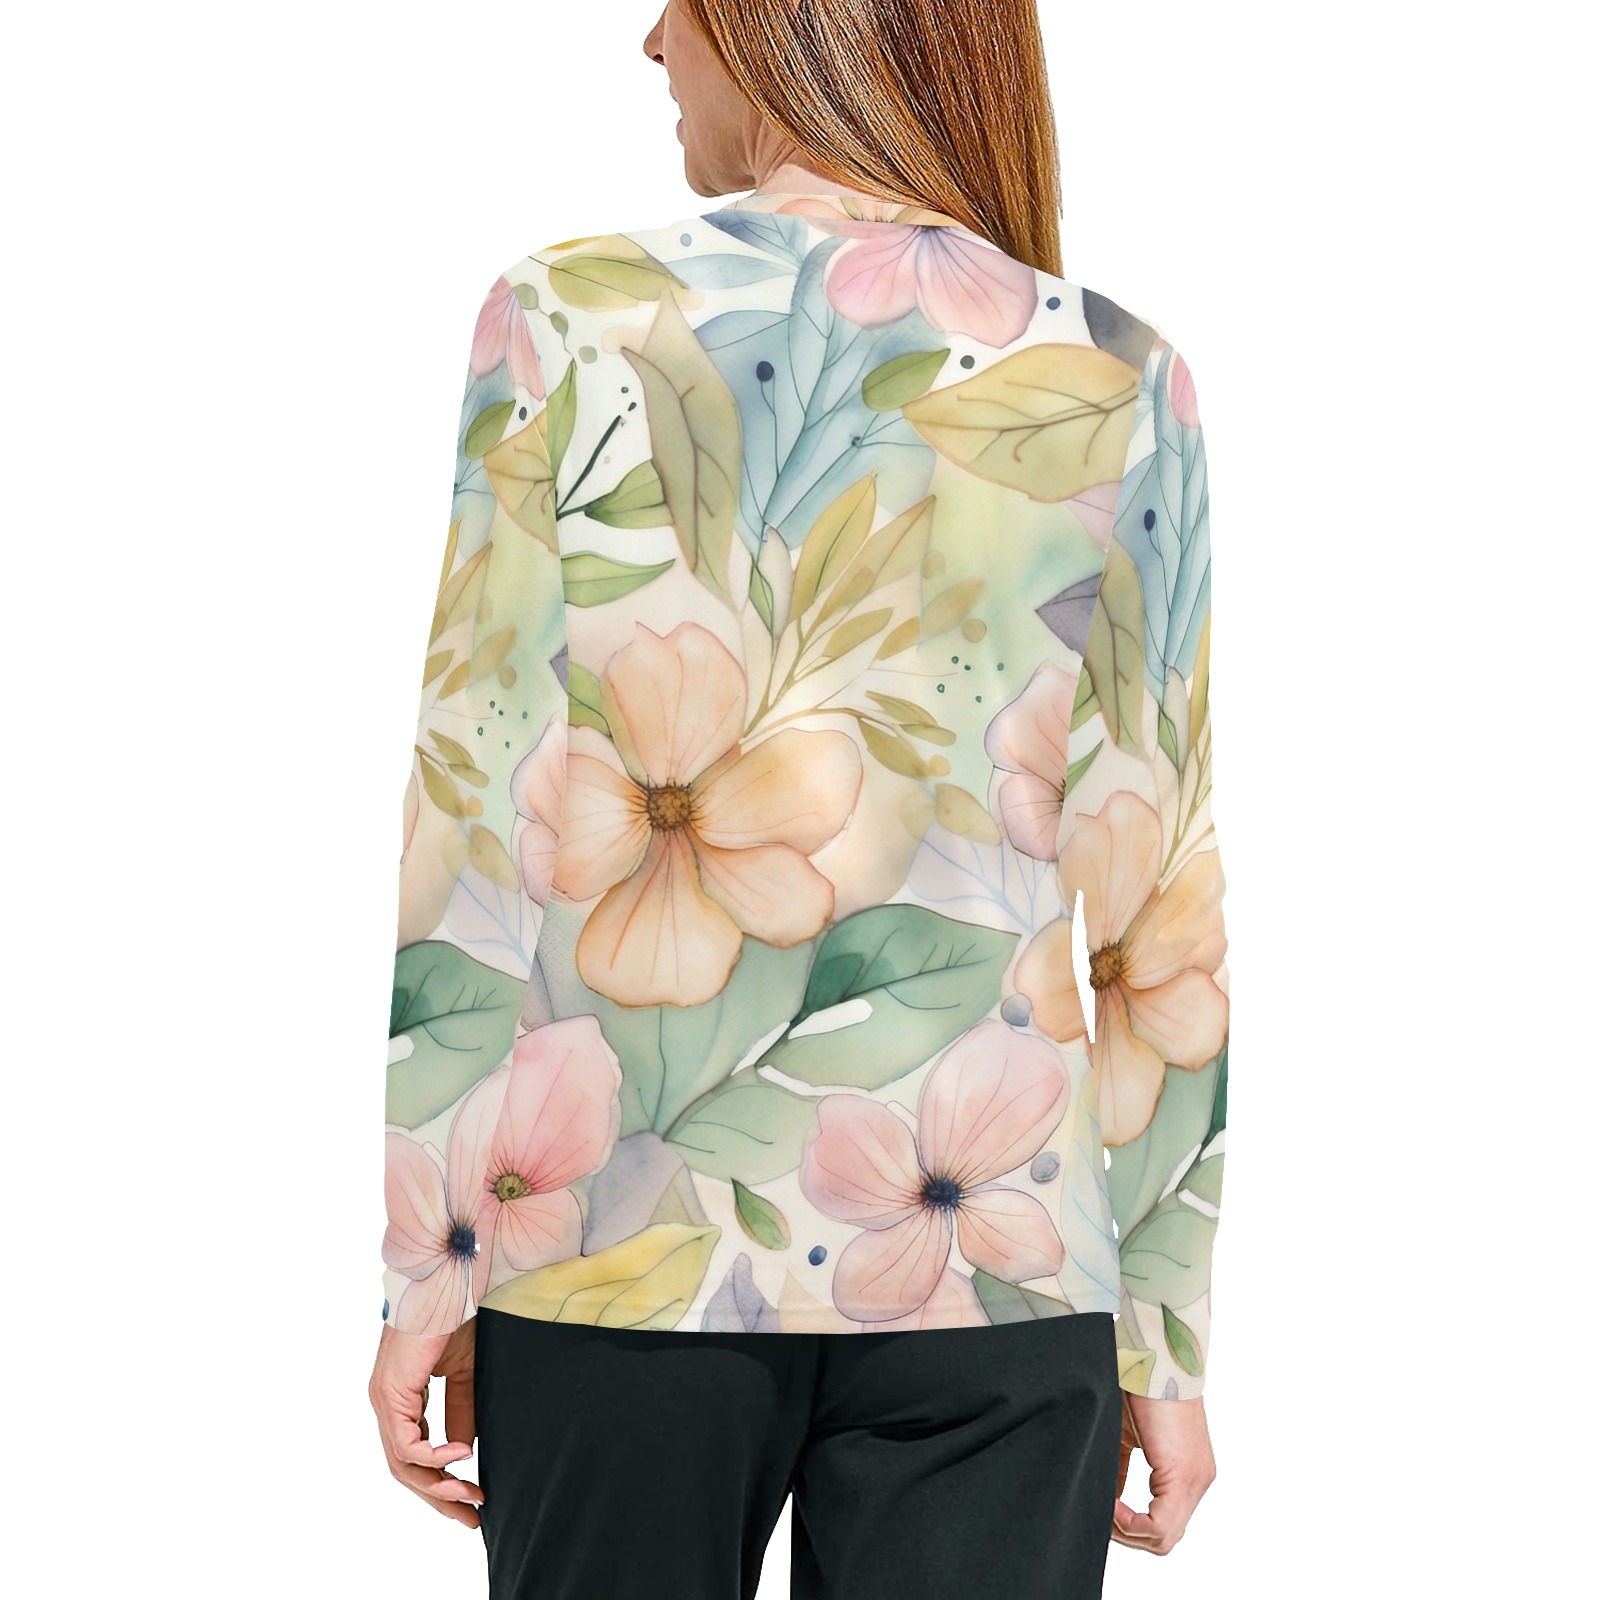 Watercolor Floral 1 Women's All Over Print Pajama Top